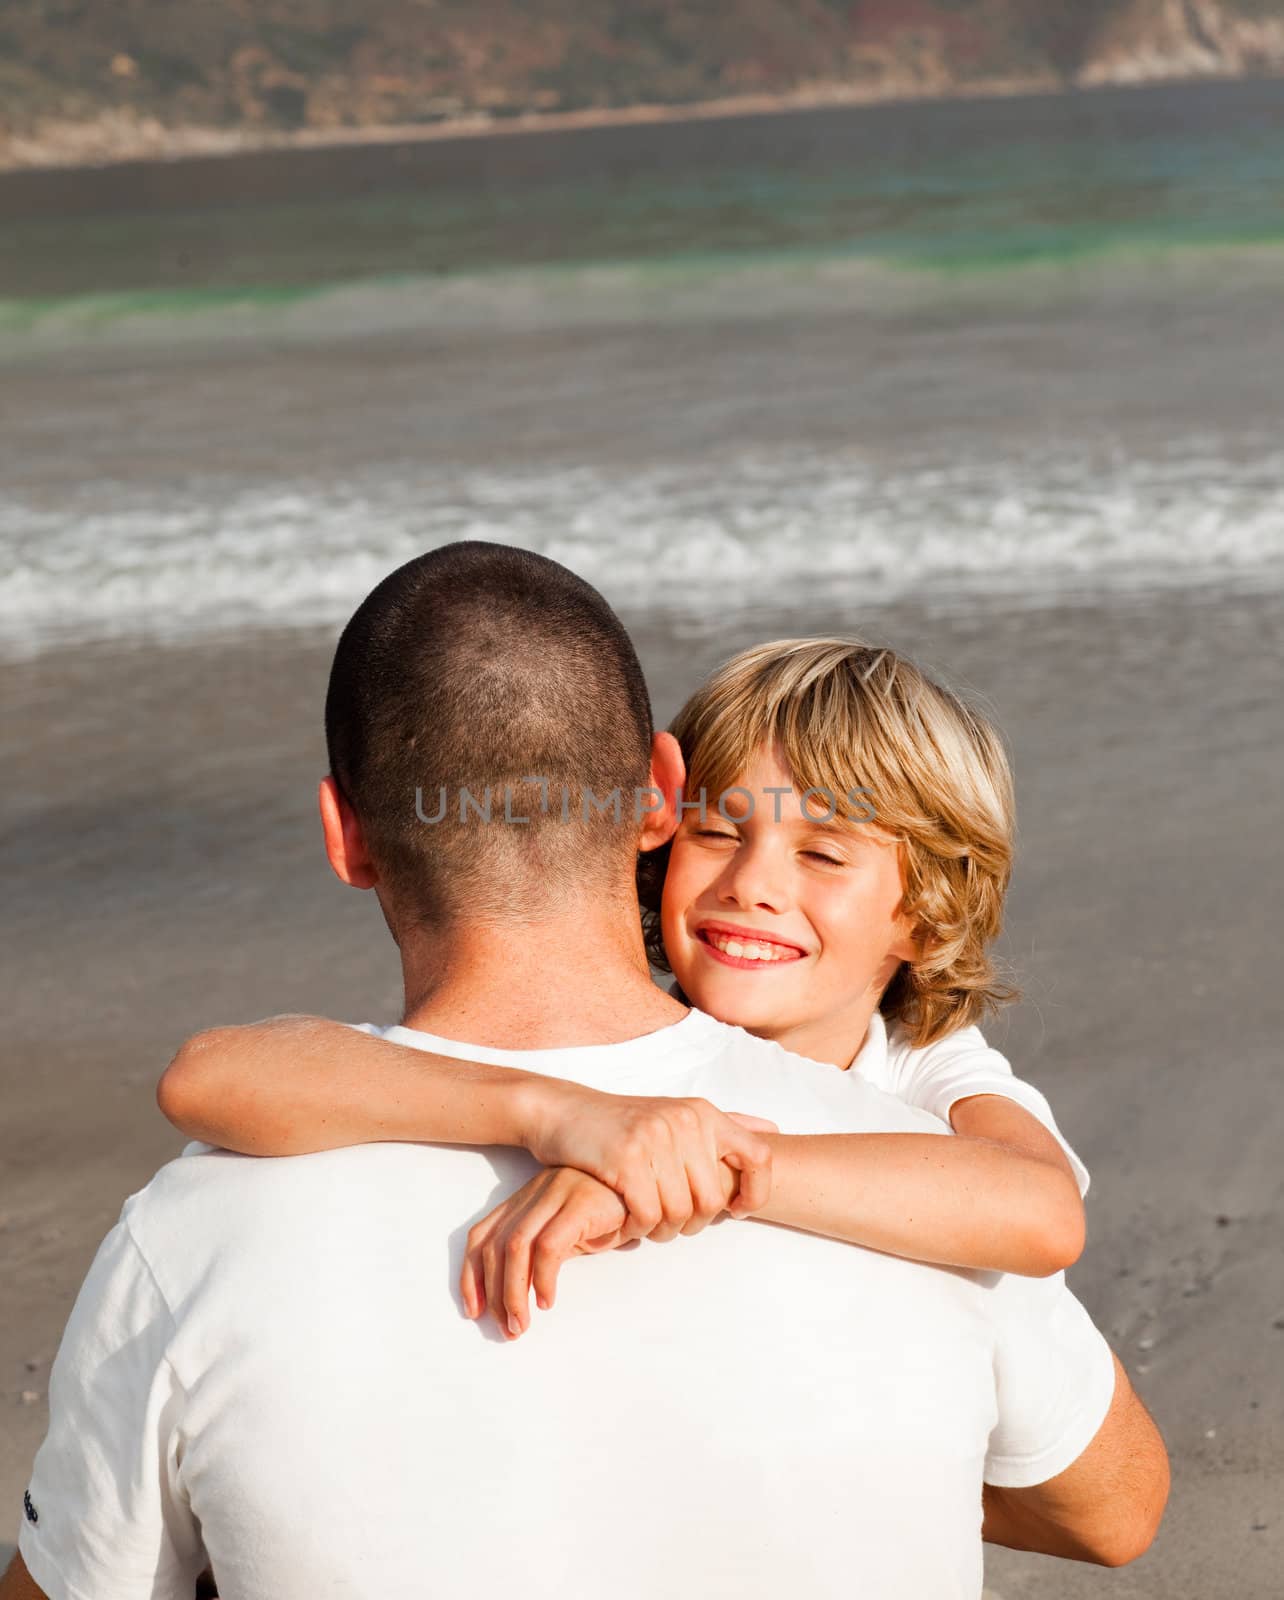 Son and father hugging on the beach